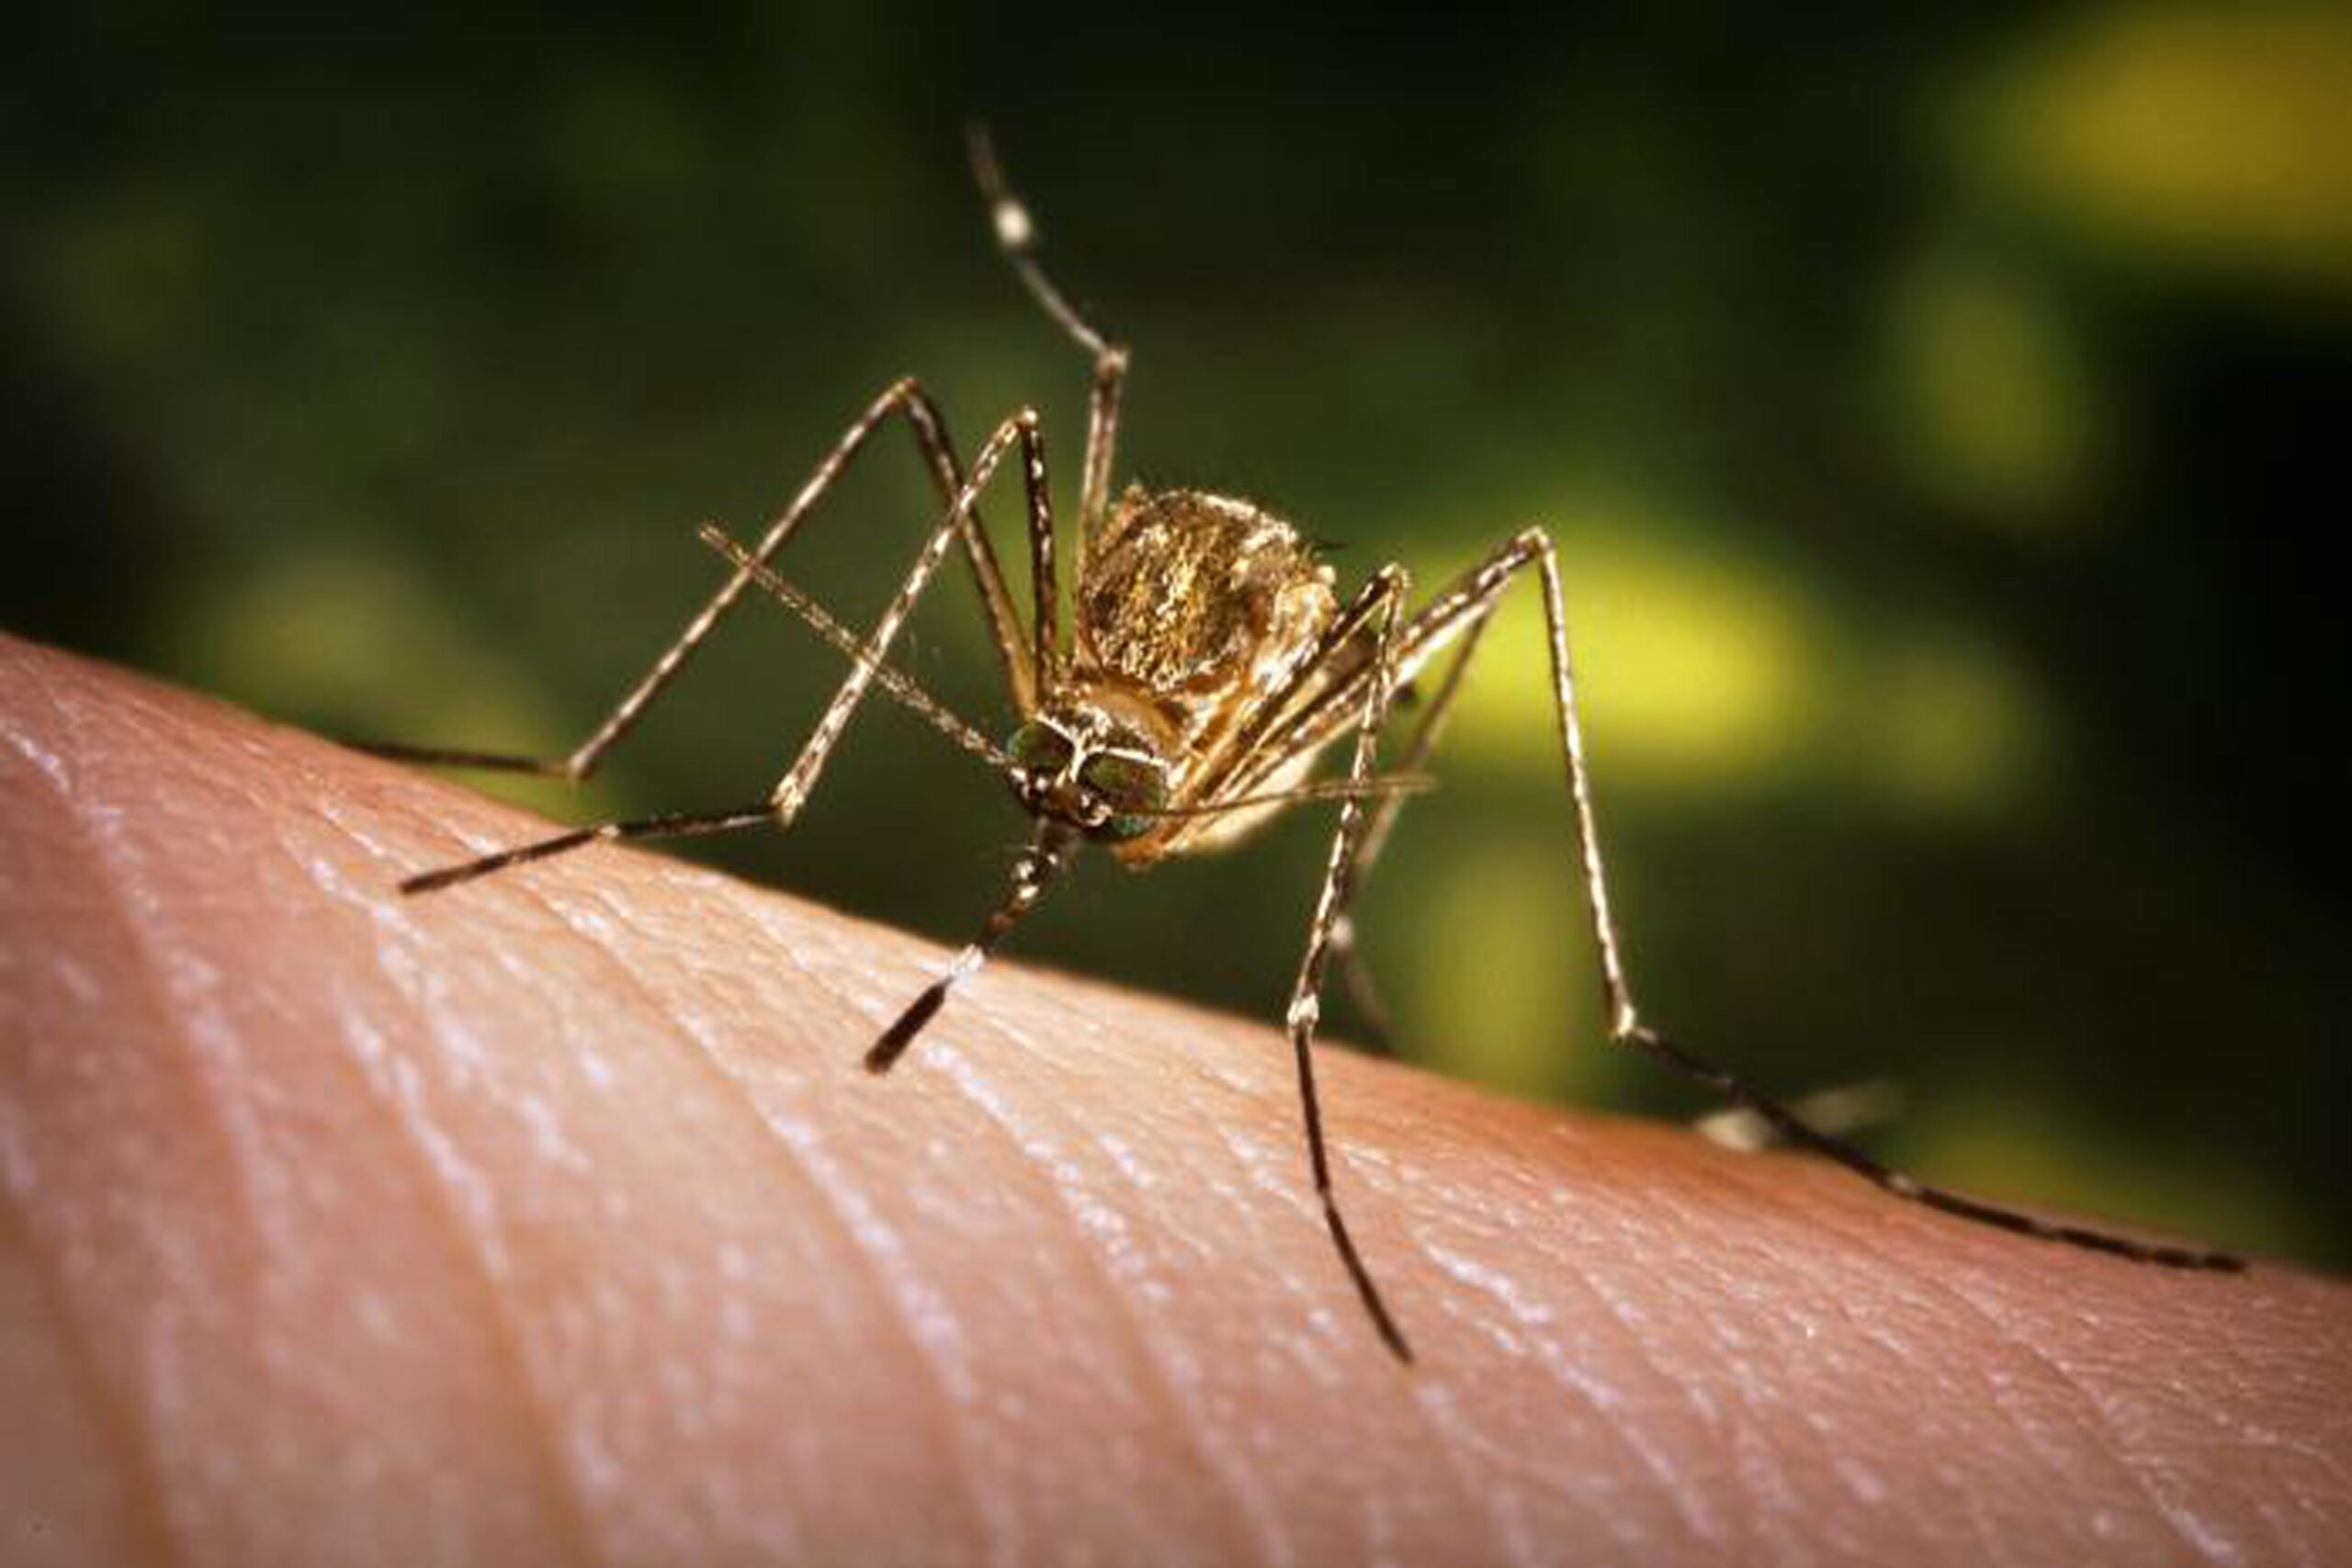 As Japanese encephalitis cases go up in Chitwan, district likely hit by epidemic